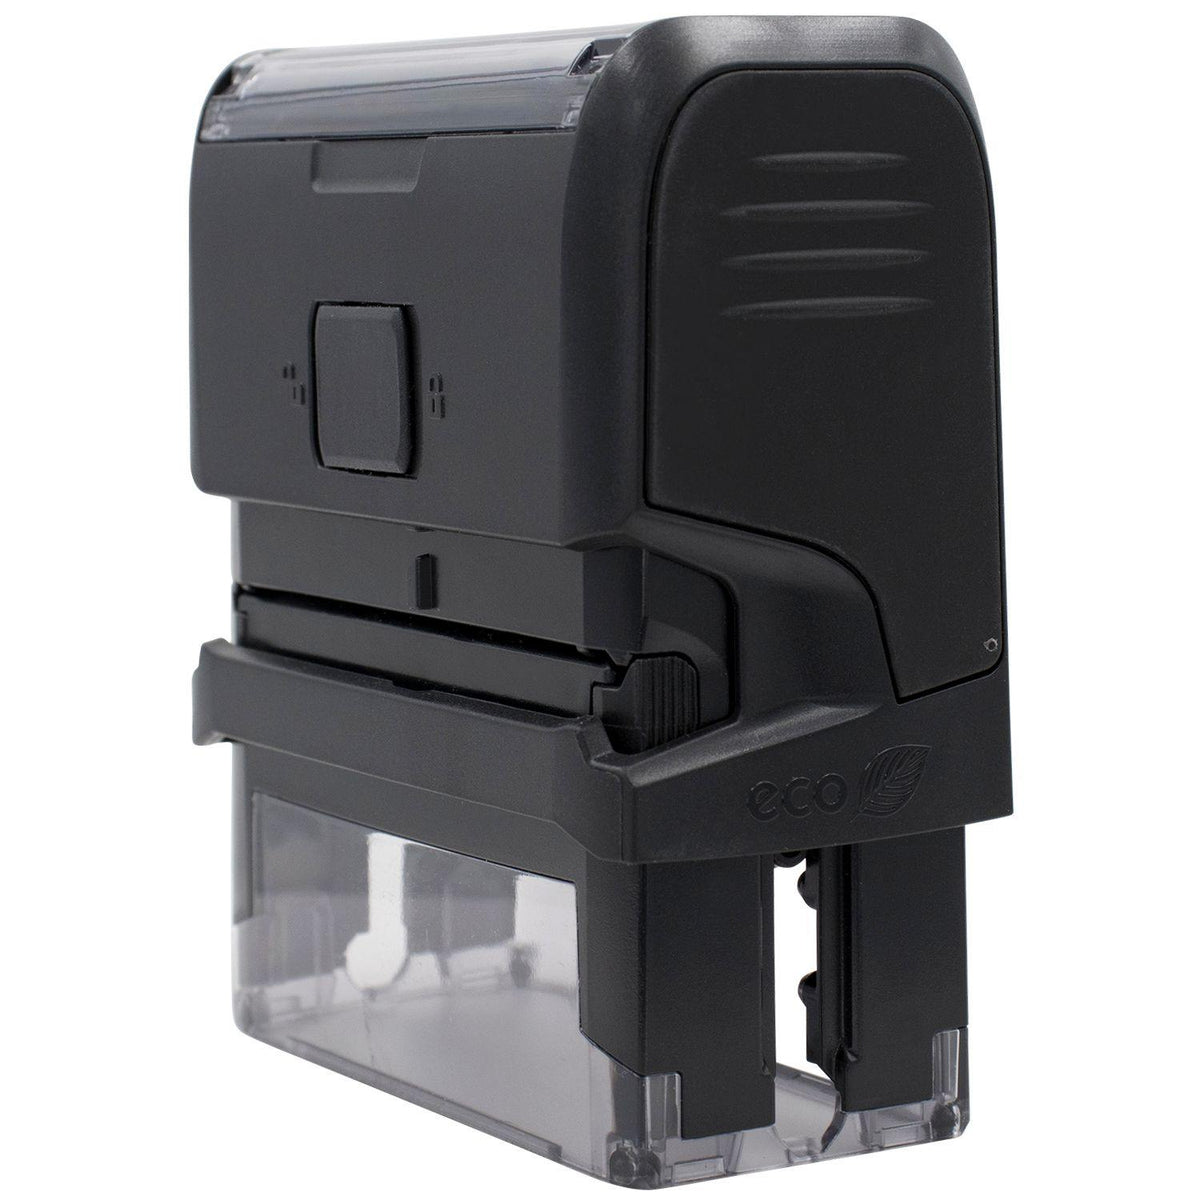 Large Self-Inking Despachado Stamp - Engineer Seal Stamps - Brand_Trodat, Impression Size_Large, Stamp Type_Self-Inking Stamp, Type of Use_Office, Type of Use_Shipping &amp; Receiving